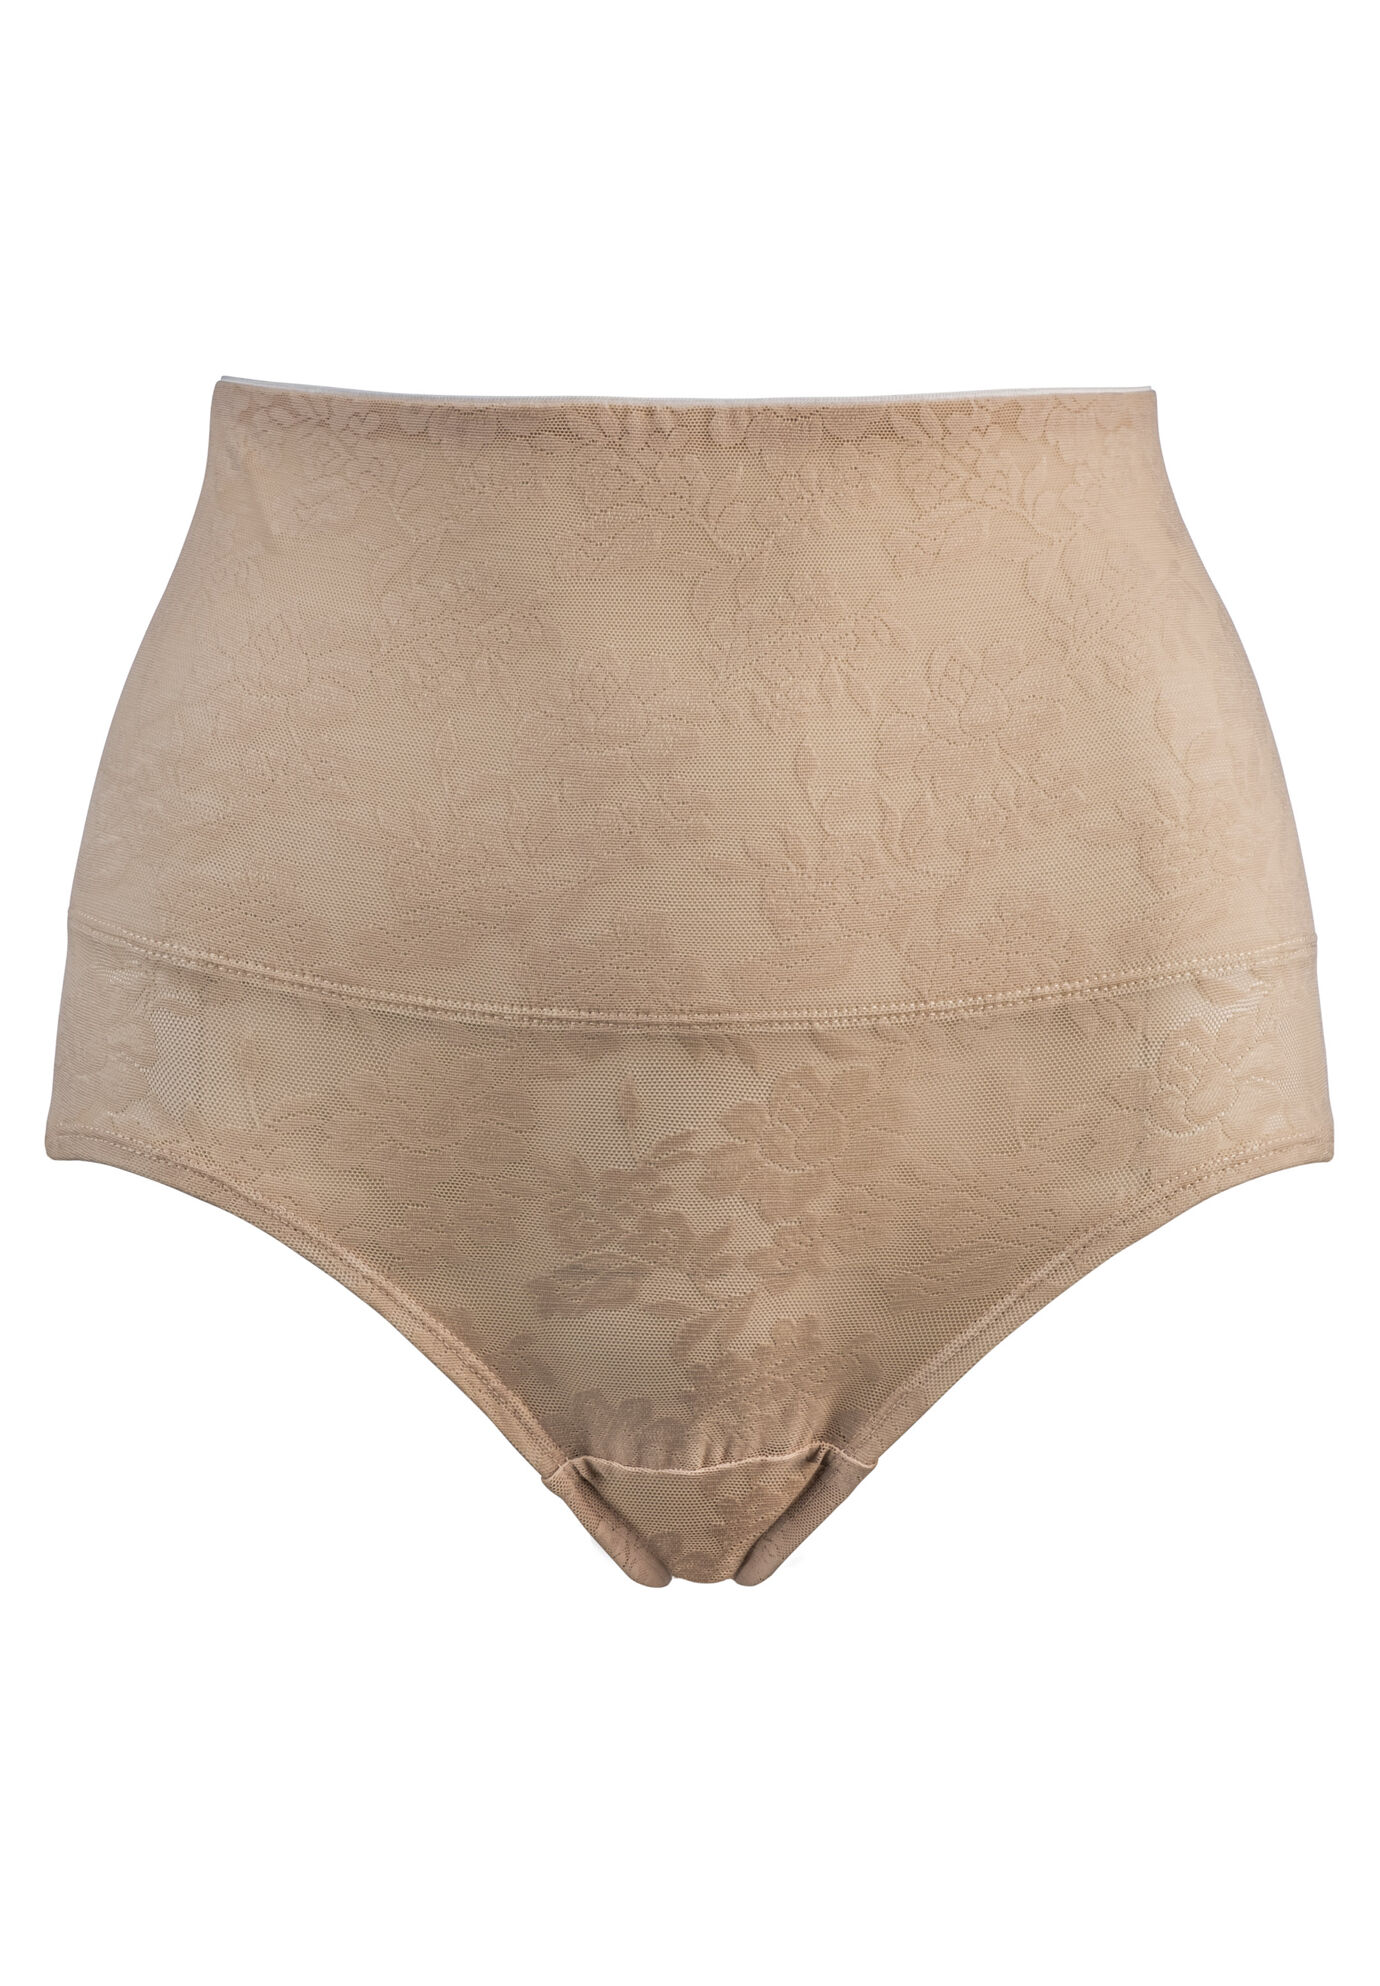 Plus Size Women's Belly Band Brief by Rago in Nude (Size XL)